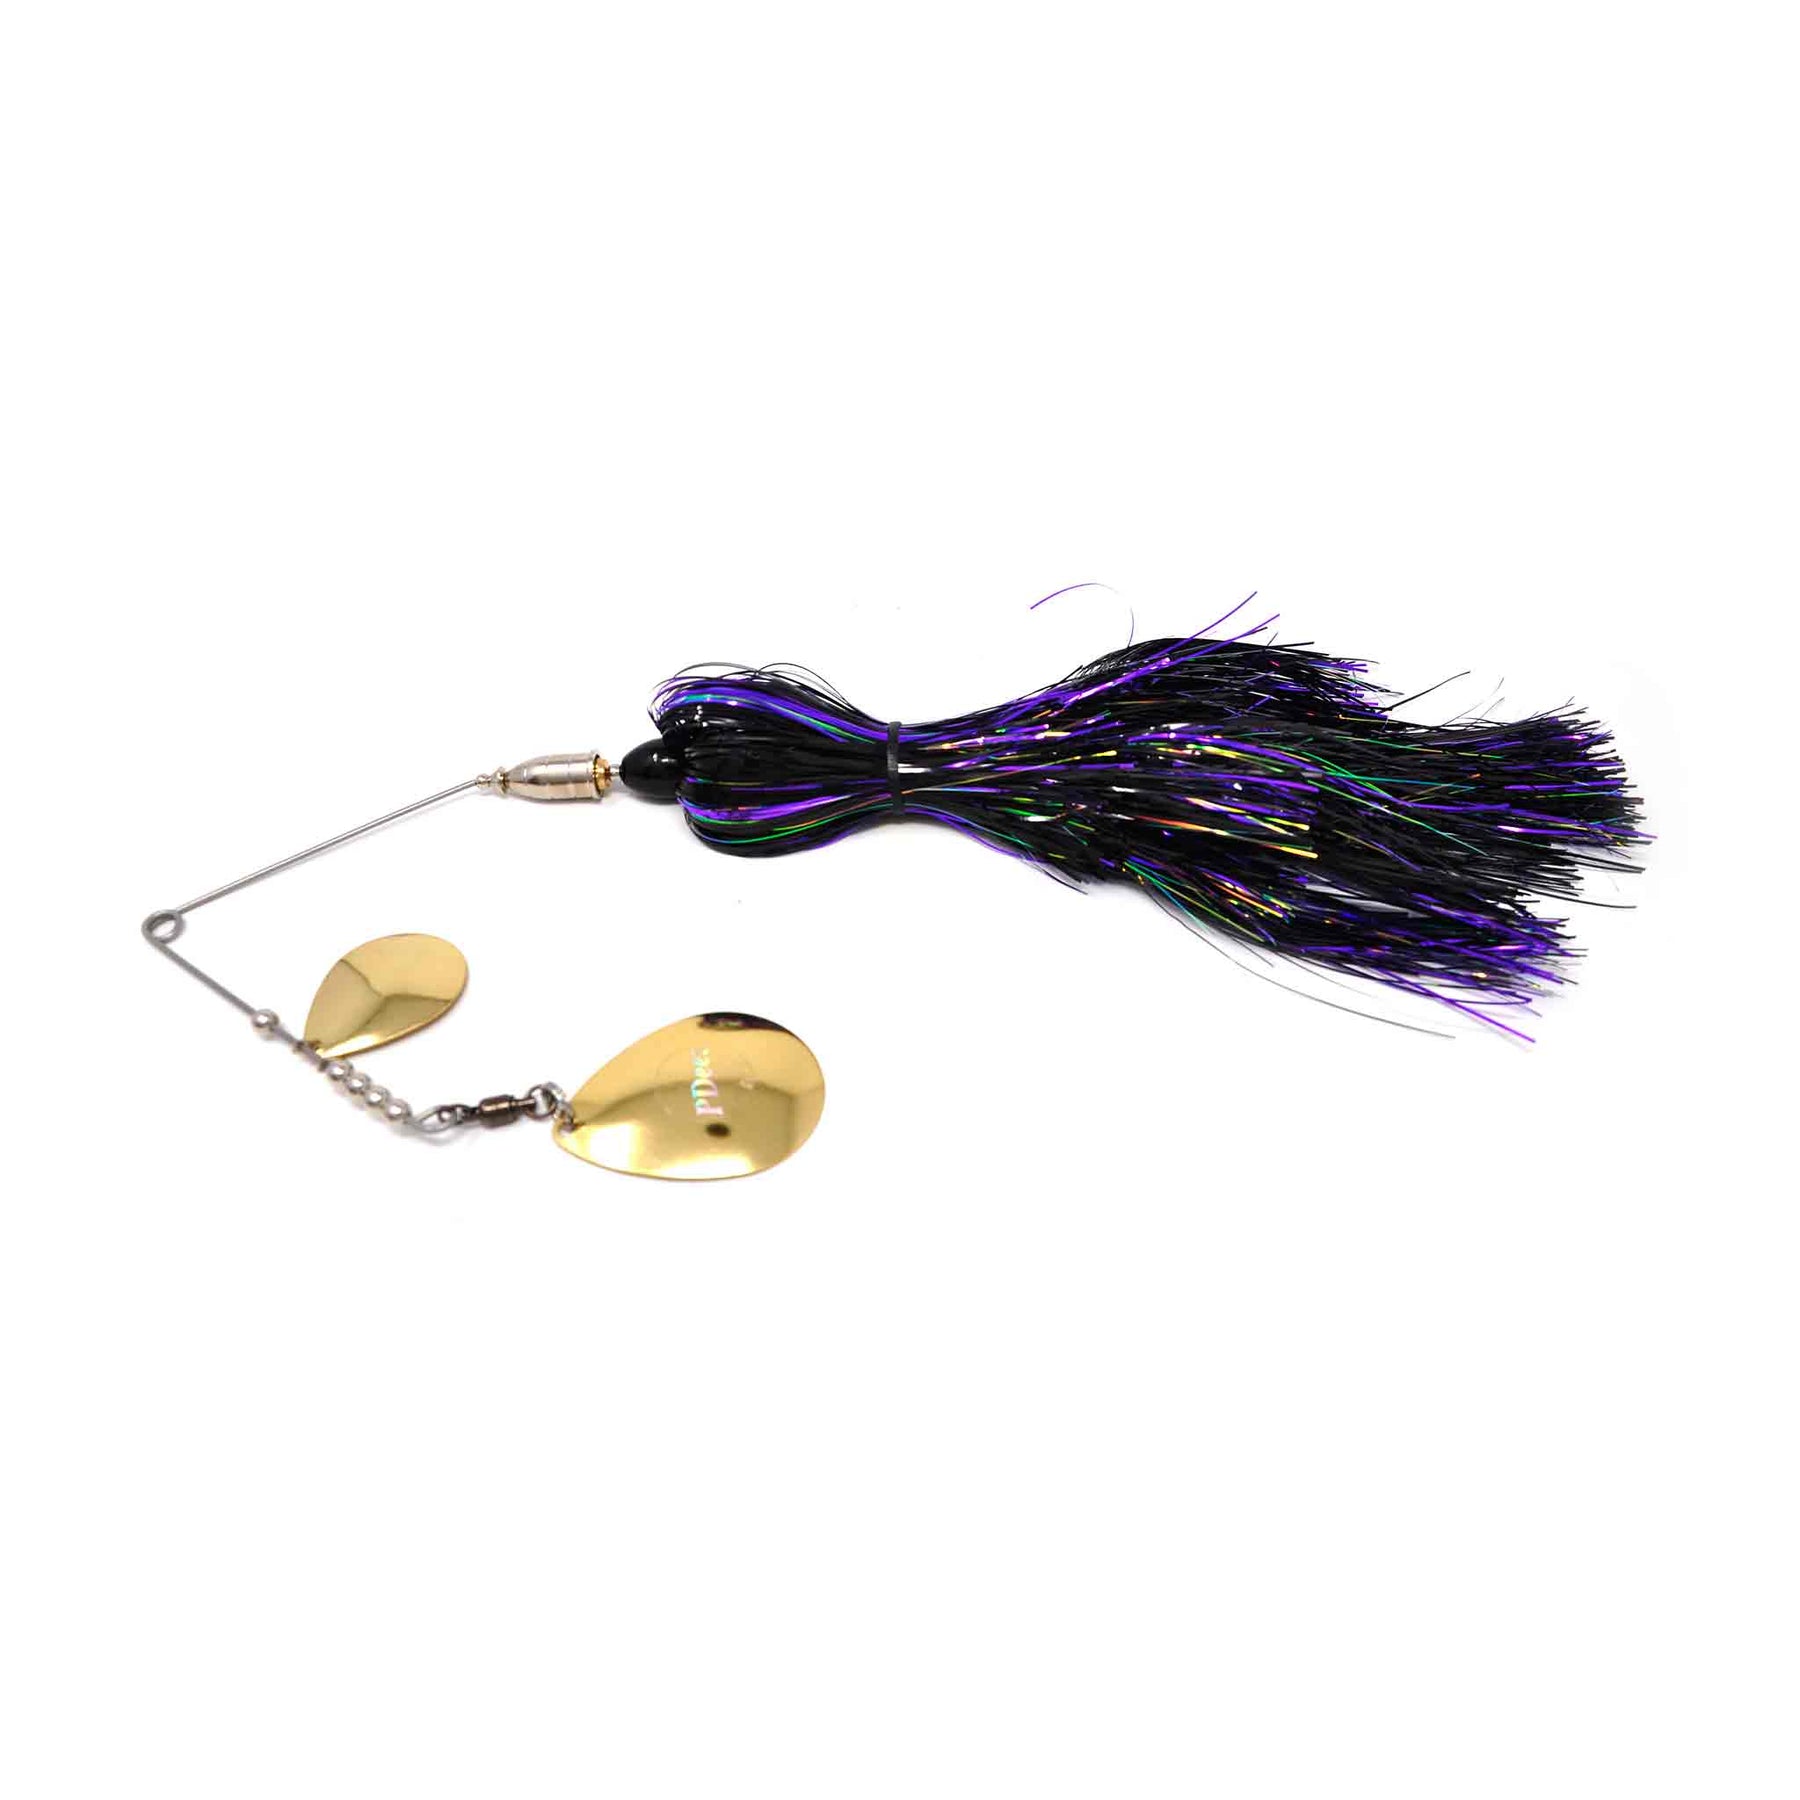 View of Spinnerbaits PDeez Bell Casting Spinnerbait Joker available at EZOKO Pike and Musky Shop